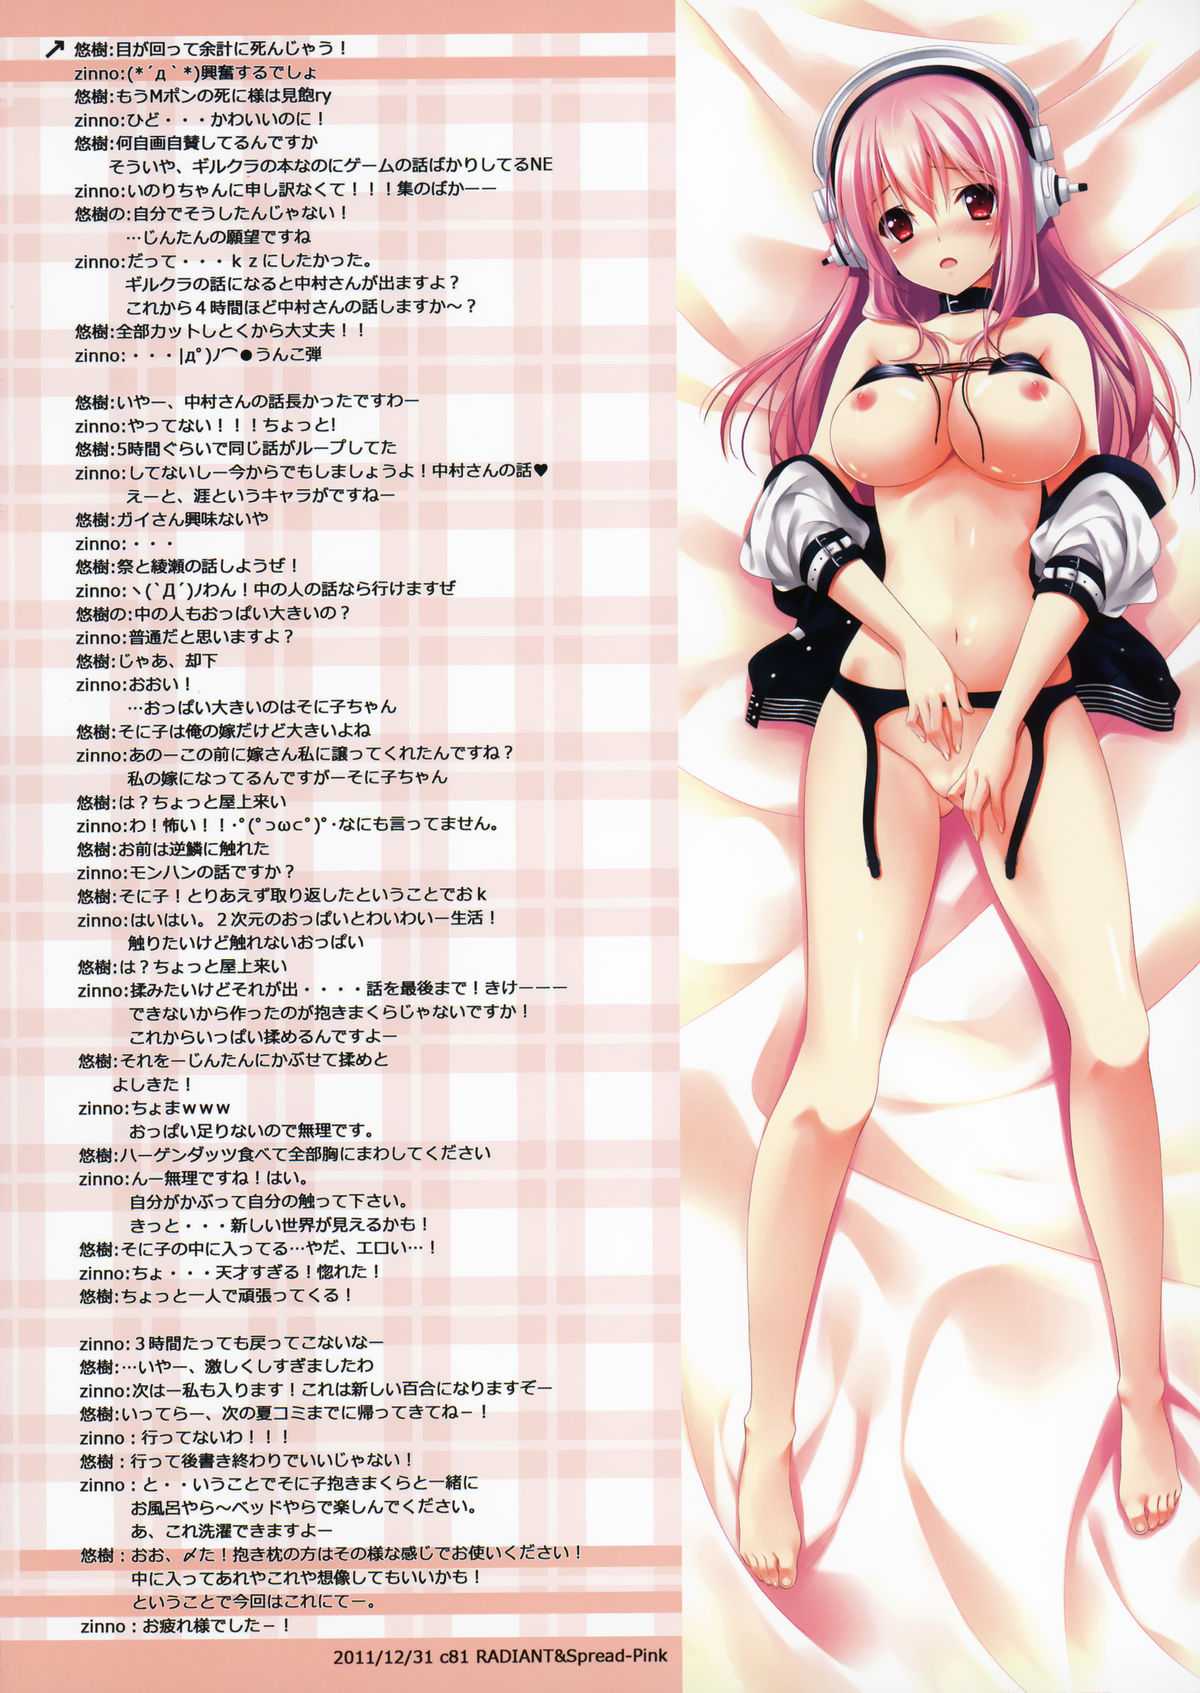 (C81) [Radiant, Spread-Pink (Yuuki Makoto, Zinno)] Guilty (Guilty Crown, Super Soniko) [Chinese] (C81) [Radiant, Spread-Pink (悠樹真琴, Zinno)] Guilty (ギルティクラウン, すーぱーそに子) [中文翻譯]